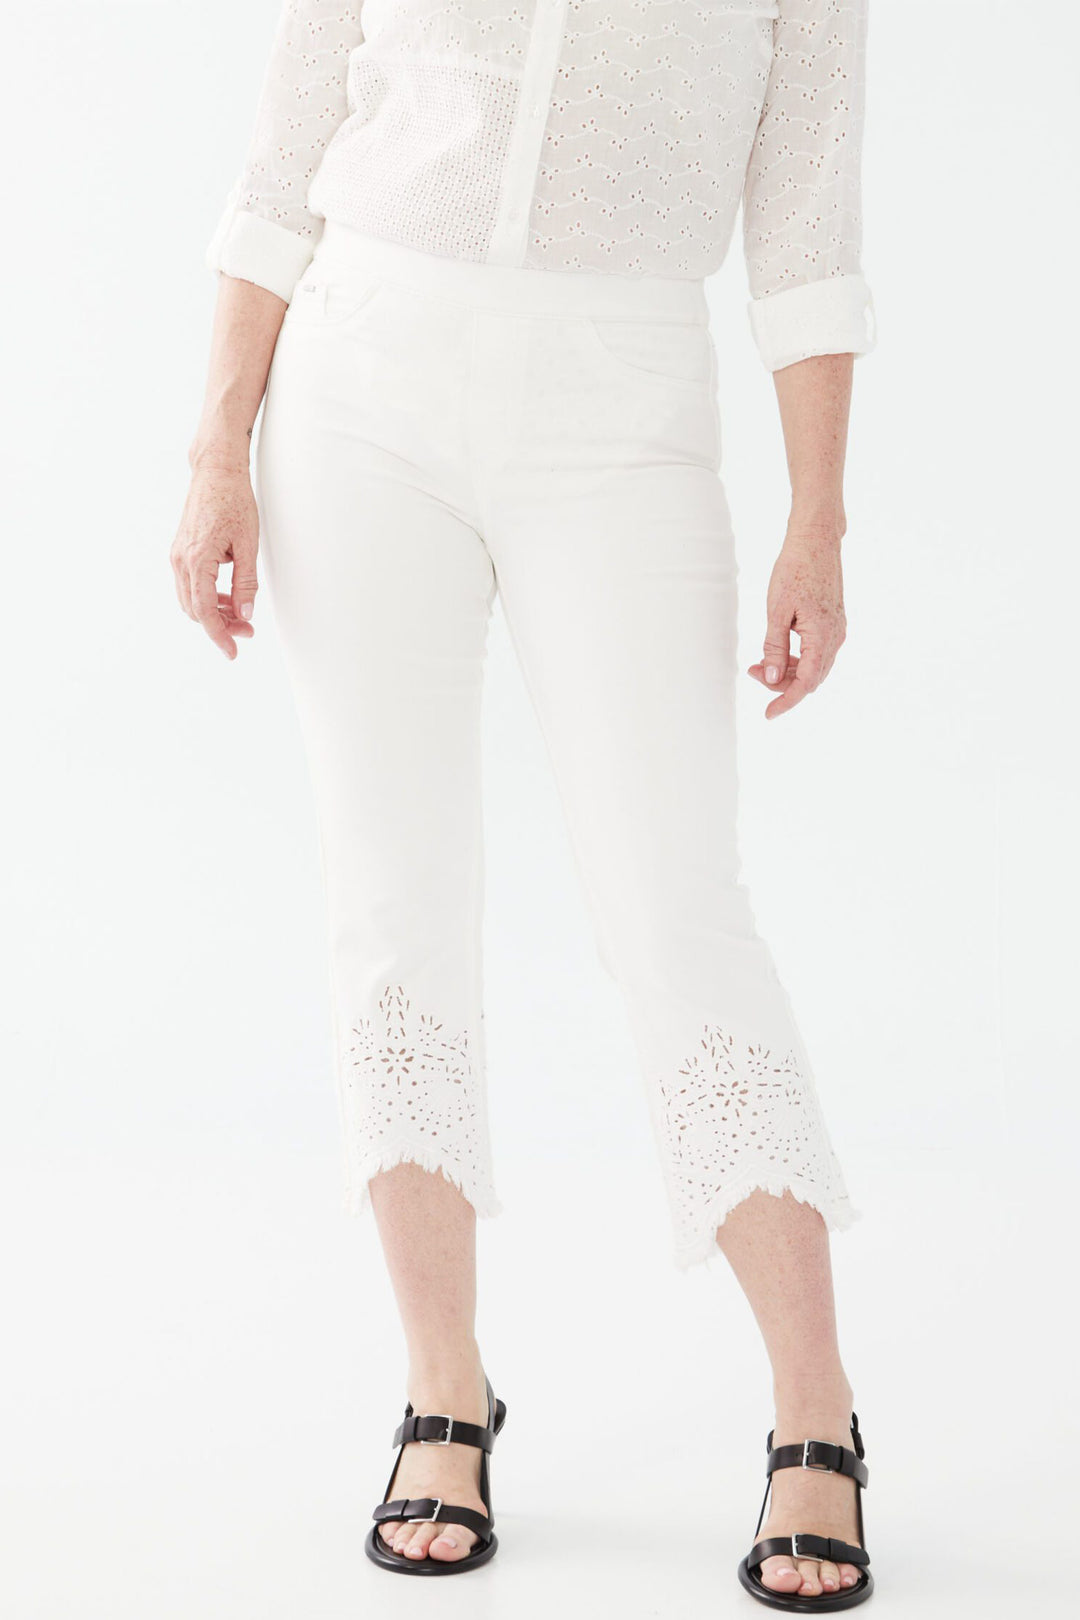 Capri Legging with Lace and Bling Hem, Made in Canada